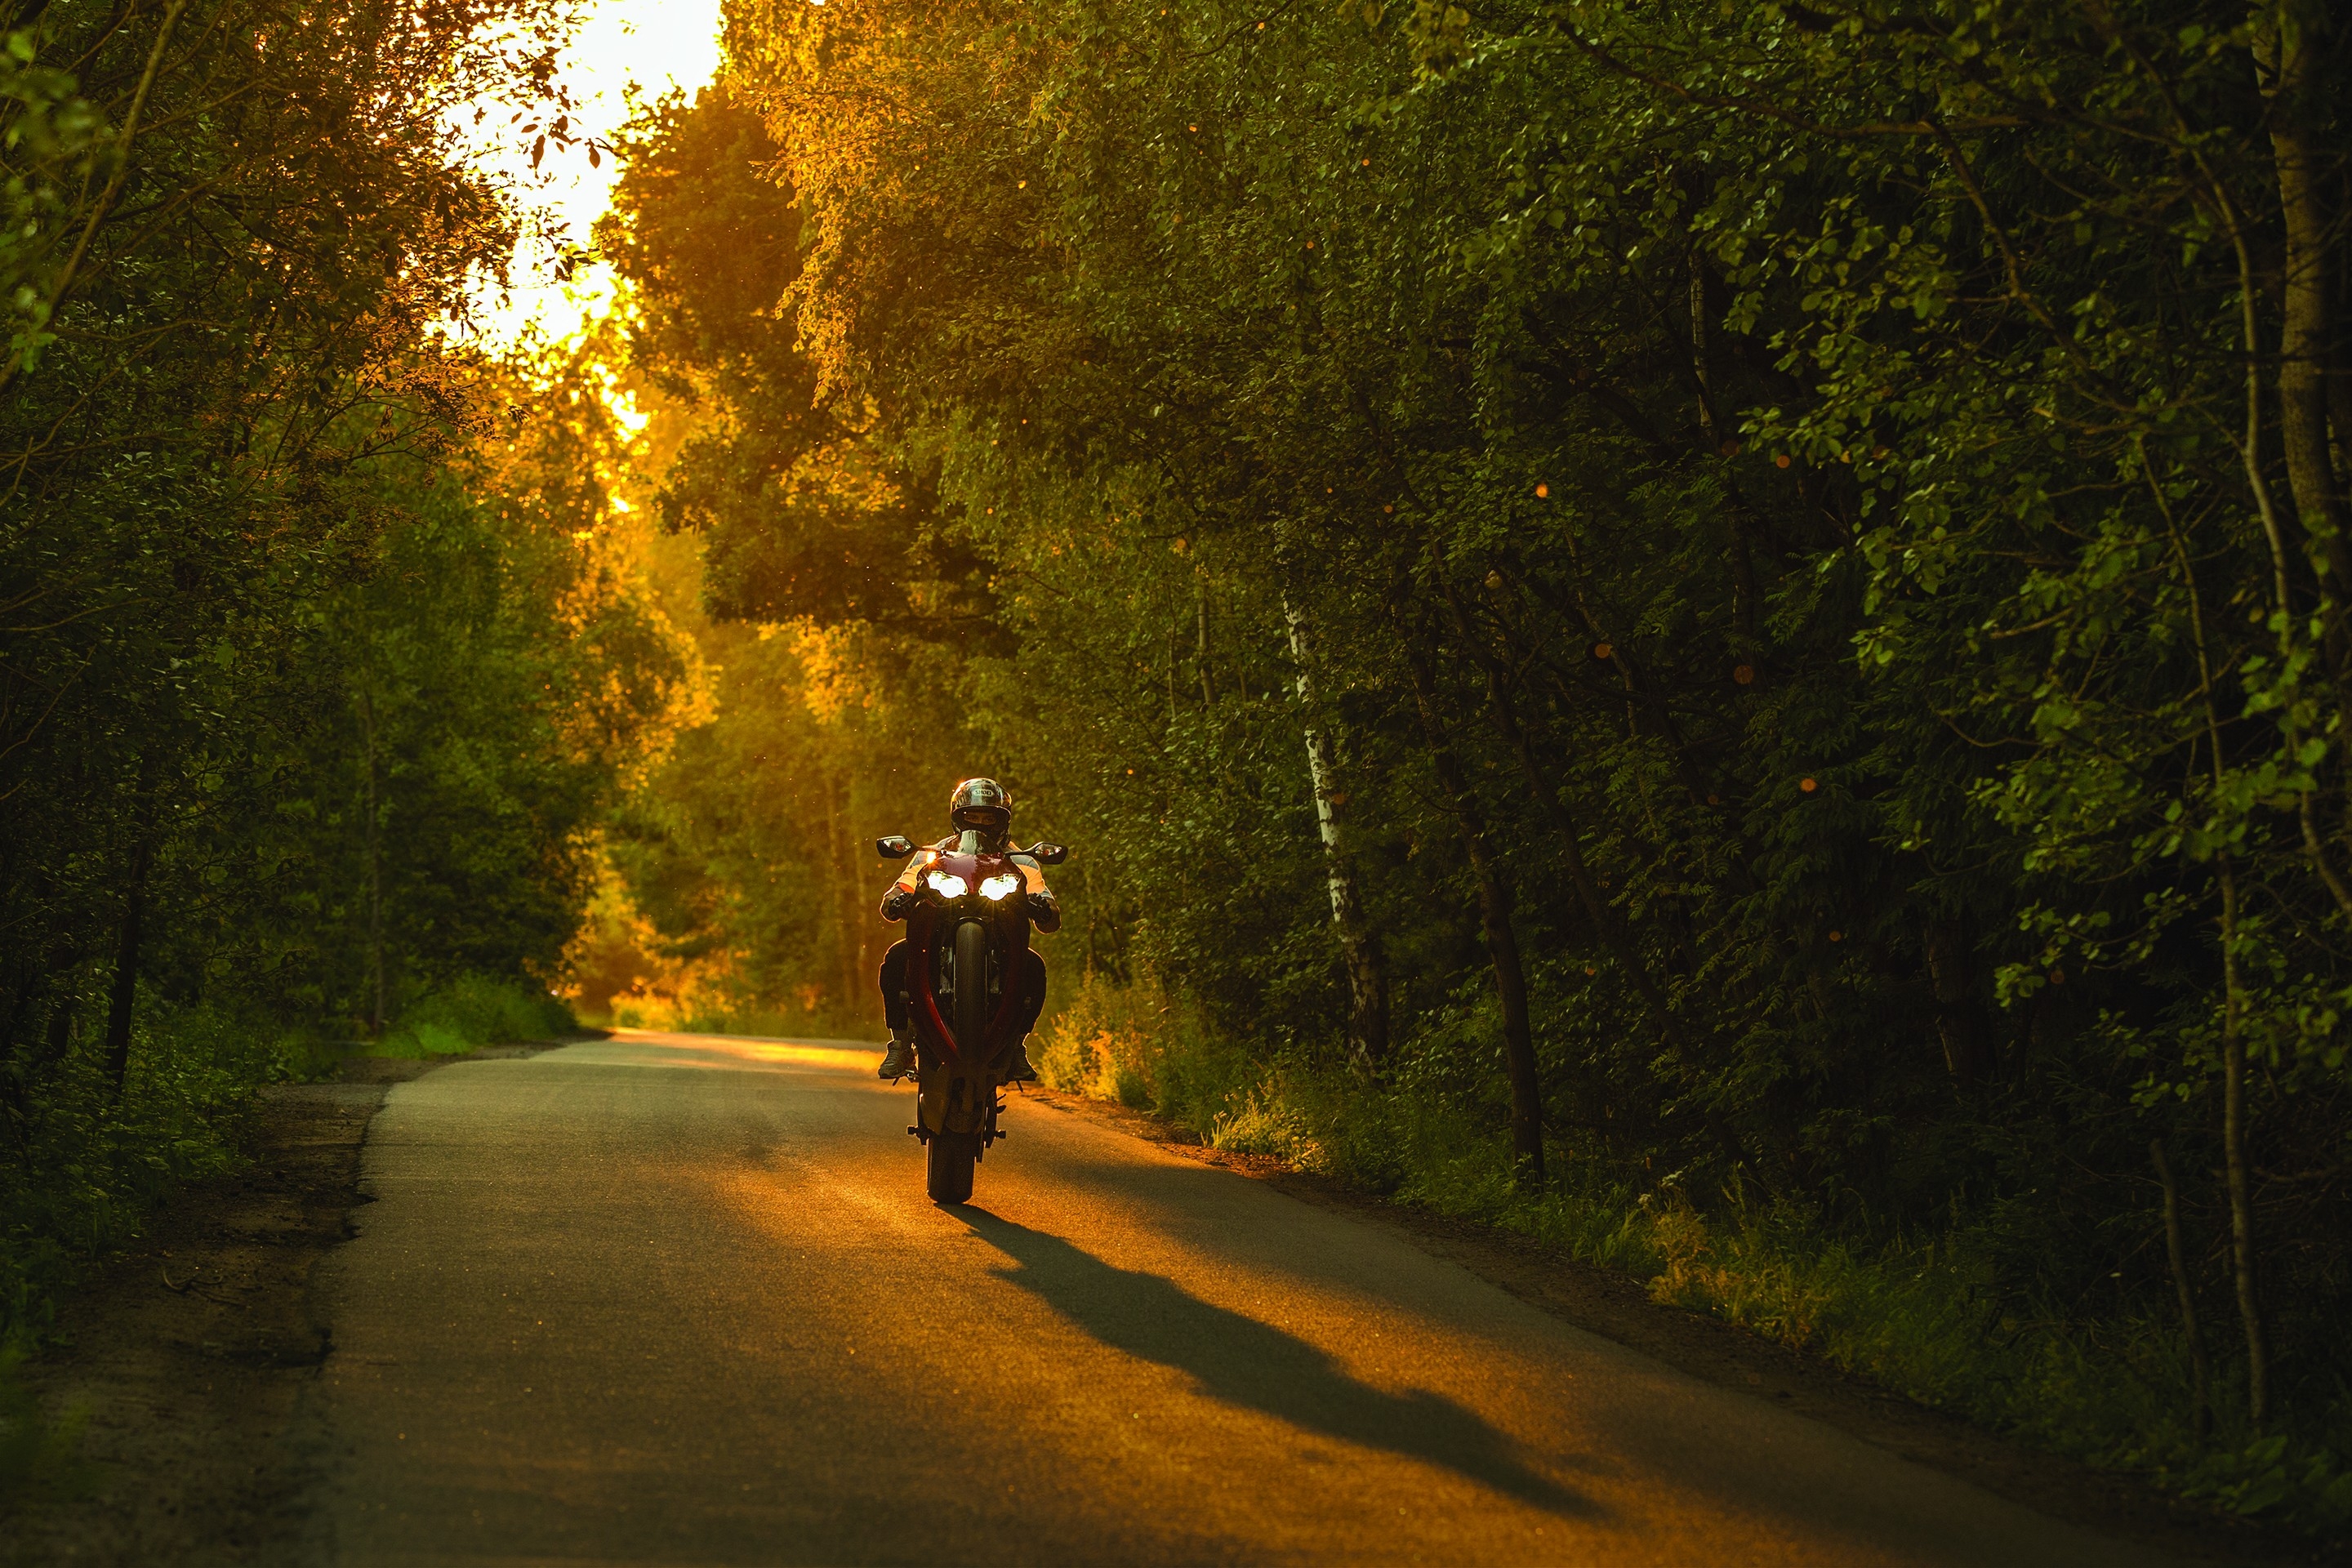 Free photo Honda cbr 1000 riding on the rear wheel through the woods at sunset